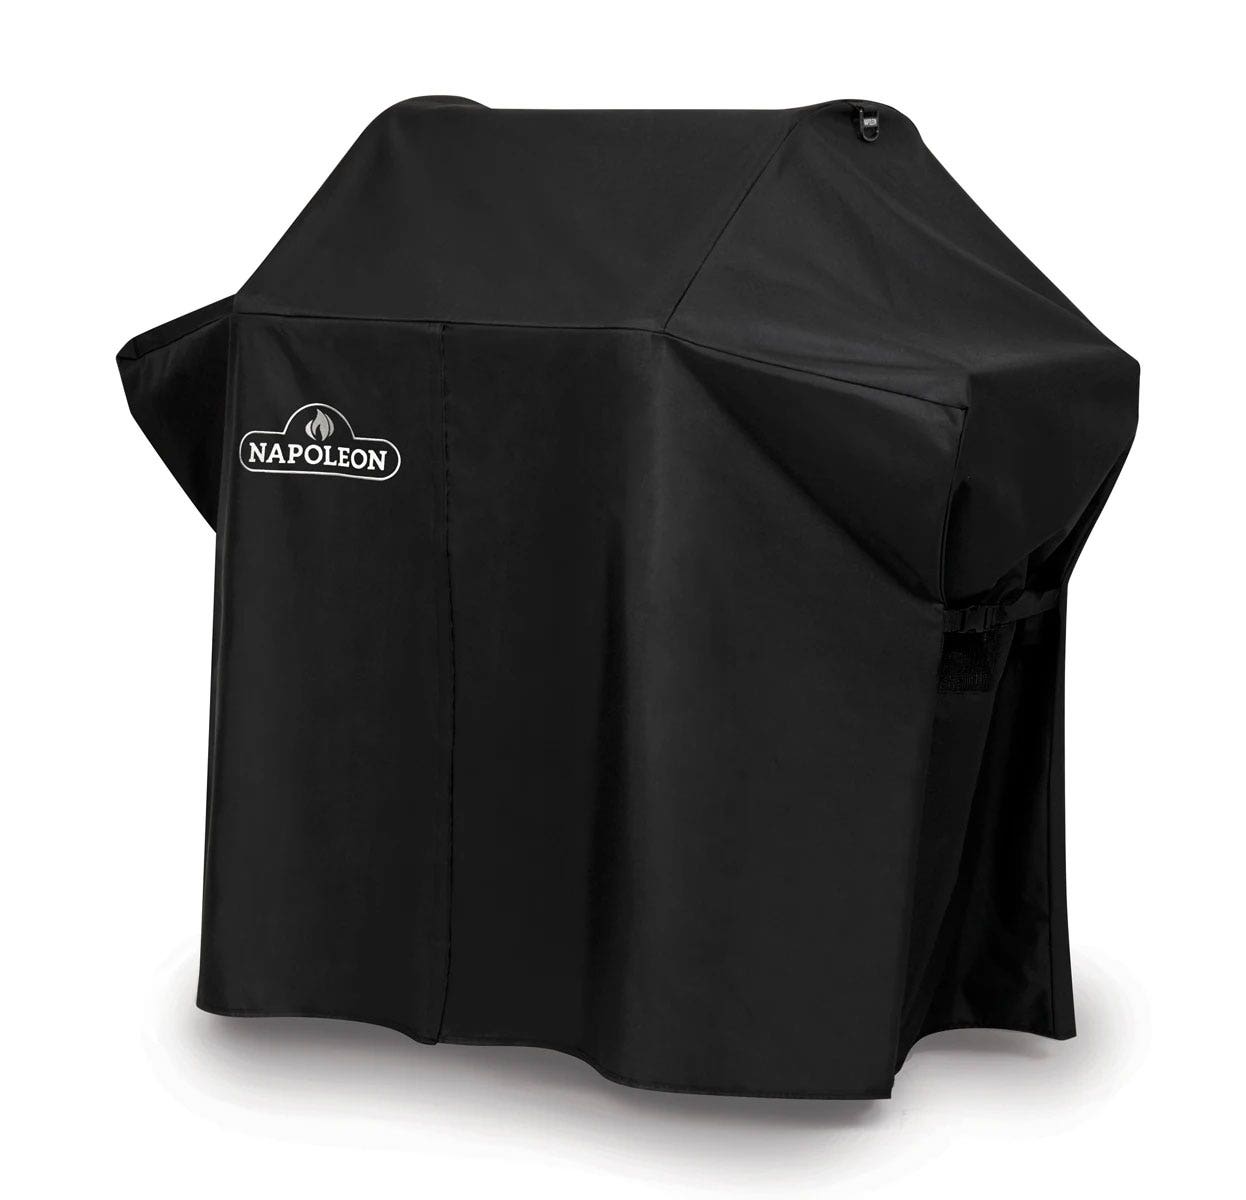 Napoleon Grills Rogue 425 Series Grill Cover with Shelves Up Outdoor Grill Covers 12027827